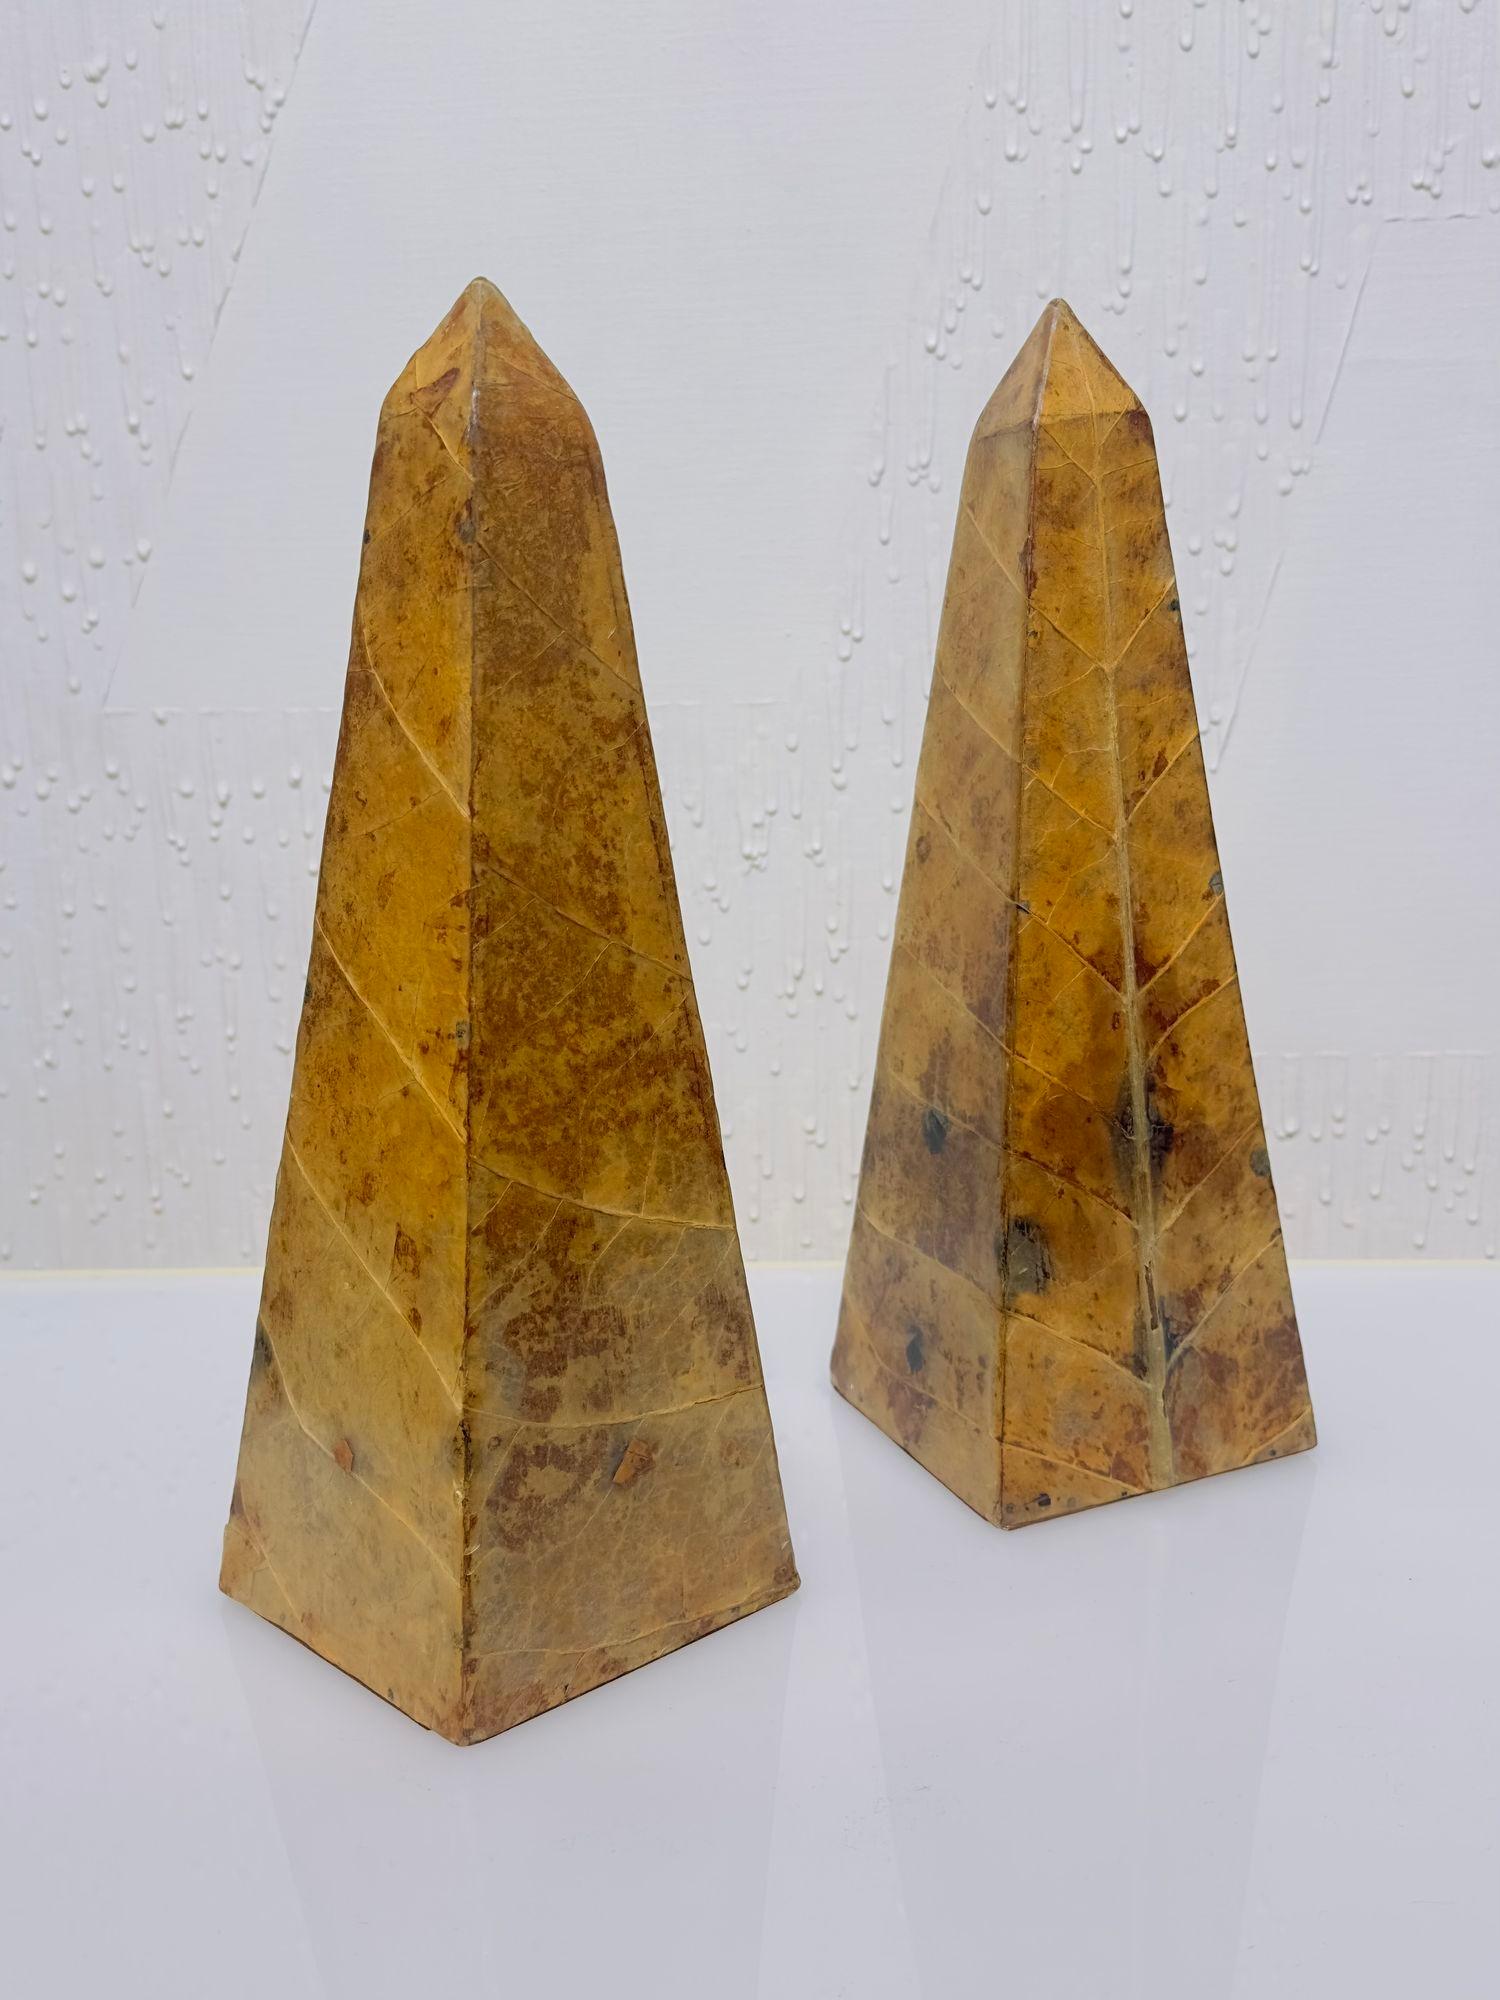 Pair Lacquered Tobacco Leaf Obelisk, Italy 1980. Excellent condition. Rare obelisk shaped pedestals in tobacco leaf by the famous Italian designer Giovanni Patrini. Giovanni Patrini - Tobacco company.
Measures 14